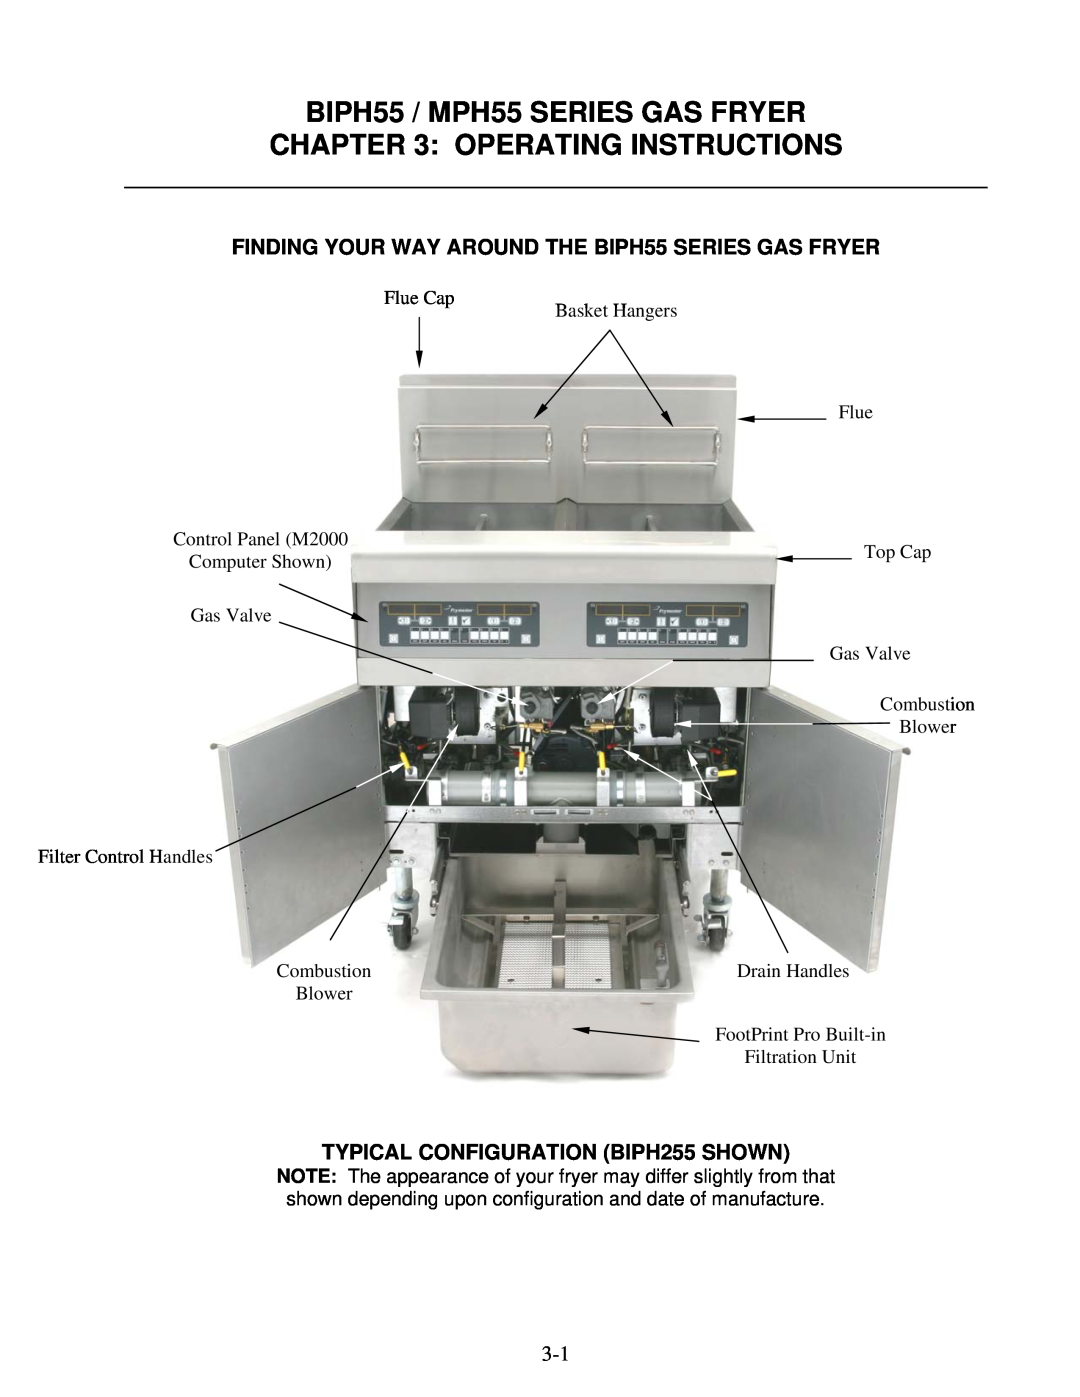 Frymaster BIPH55 / MPH55 SERIES GAS FRYER OPERATING INSTRUCTIONS, FINDING YOUR WAY AROUND THE BIPH55 SERIES GAS FRYER 